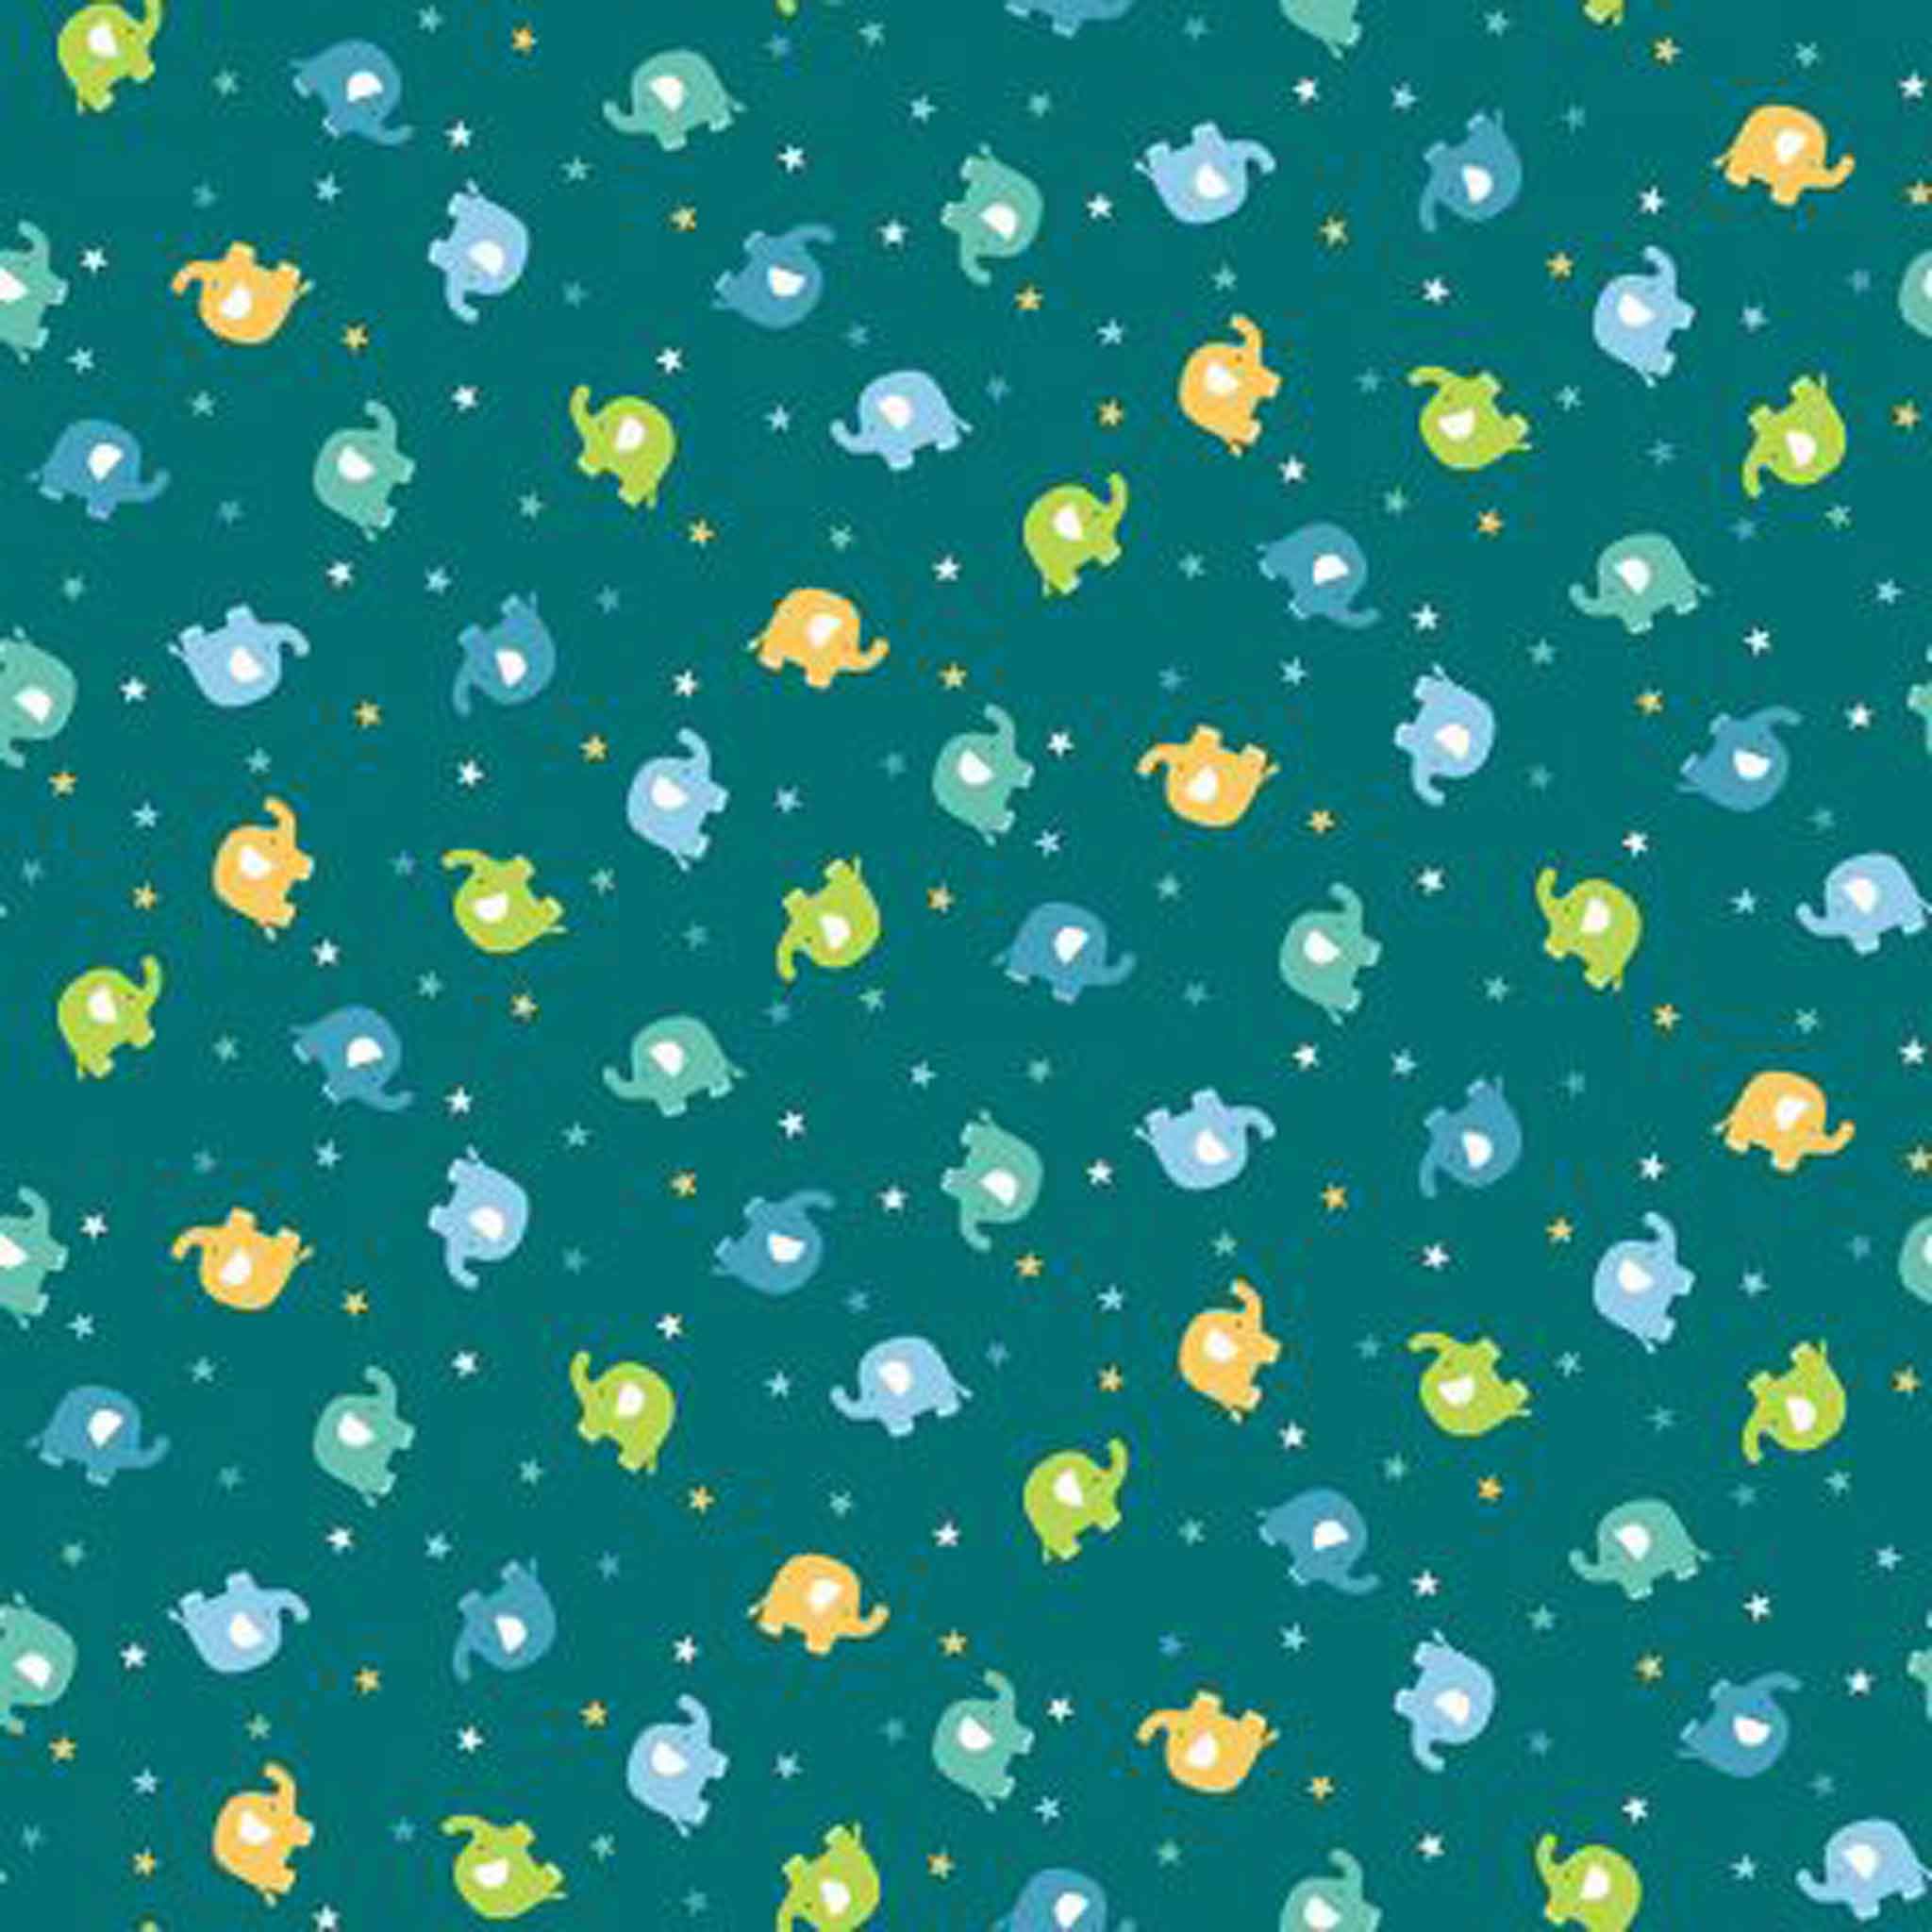 Jungle Ellie Scatter Cotton Fabric - Blue - Makower 2603/B - In The Jungle